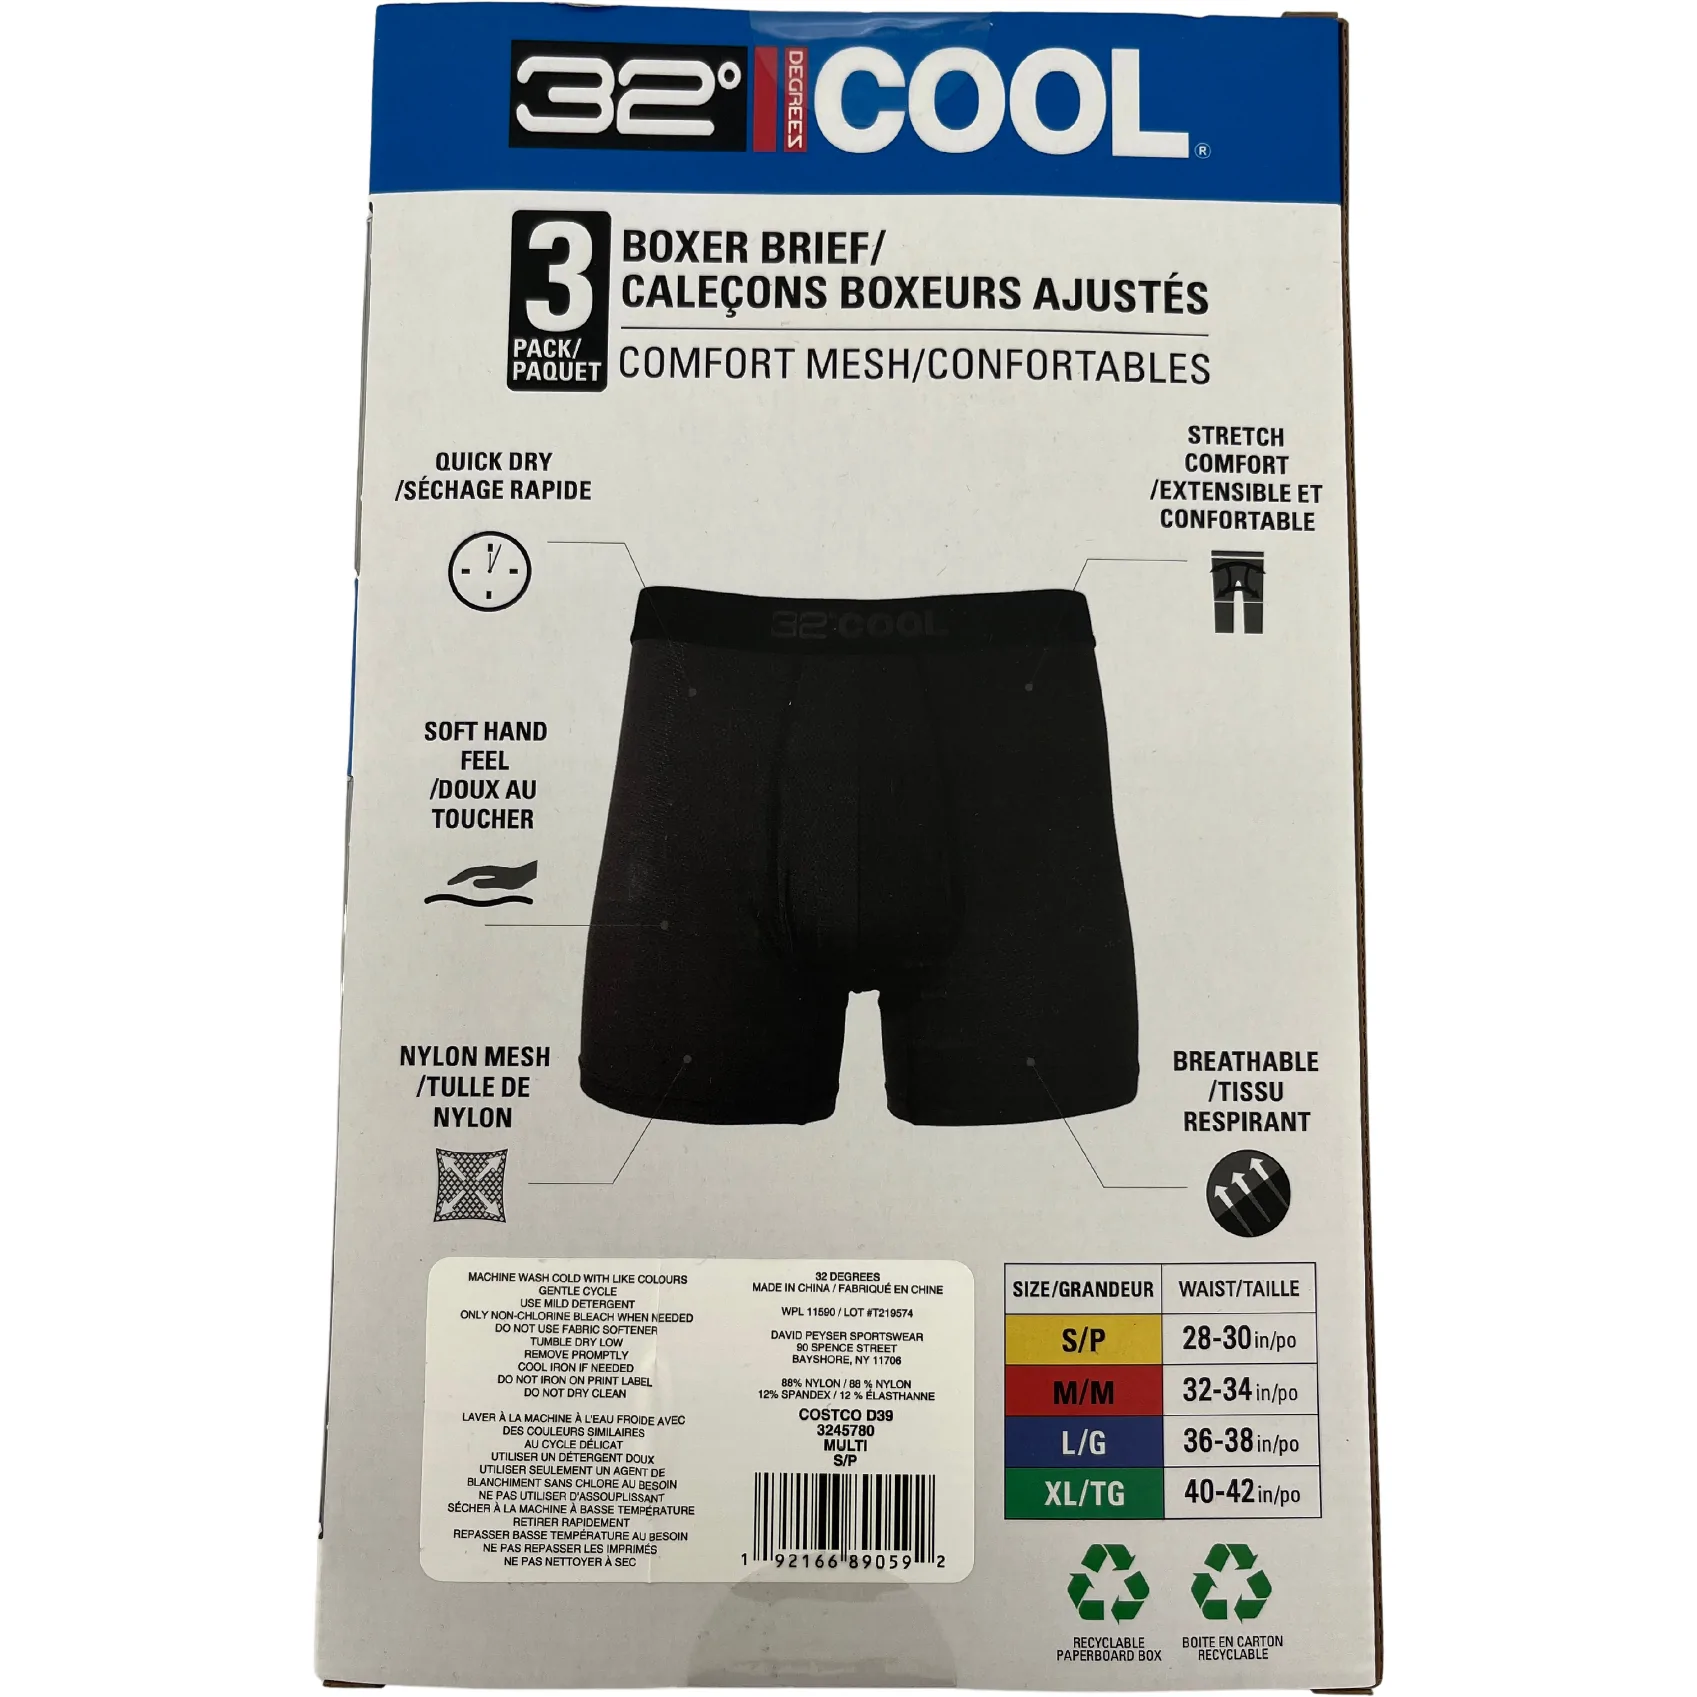 NEW in box 32 degrees 3 pack black boxer brief comfort mesh. Size Large